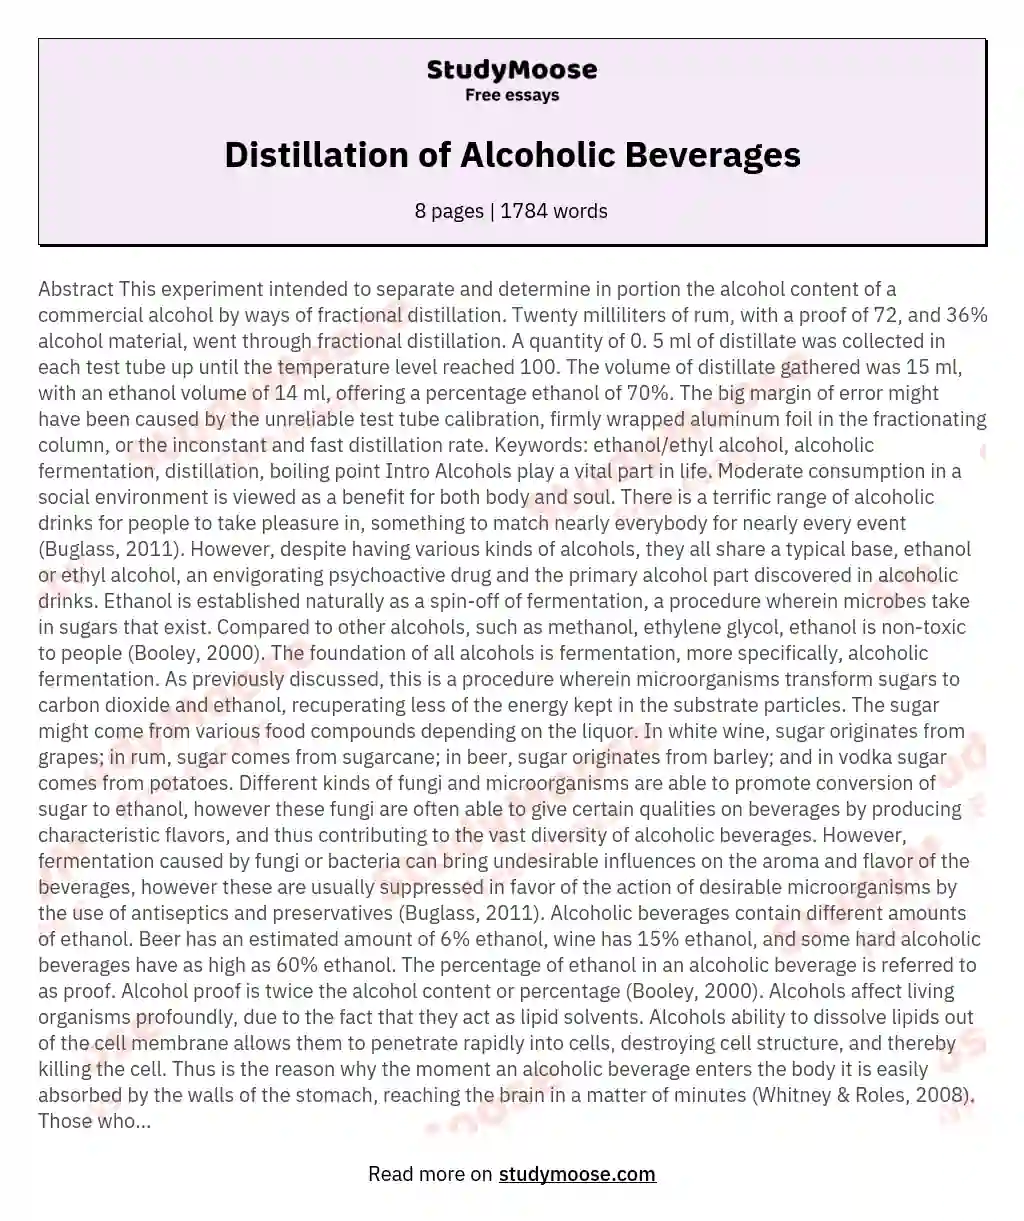 essay about alcoholic beverages